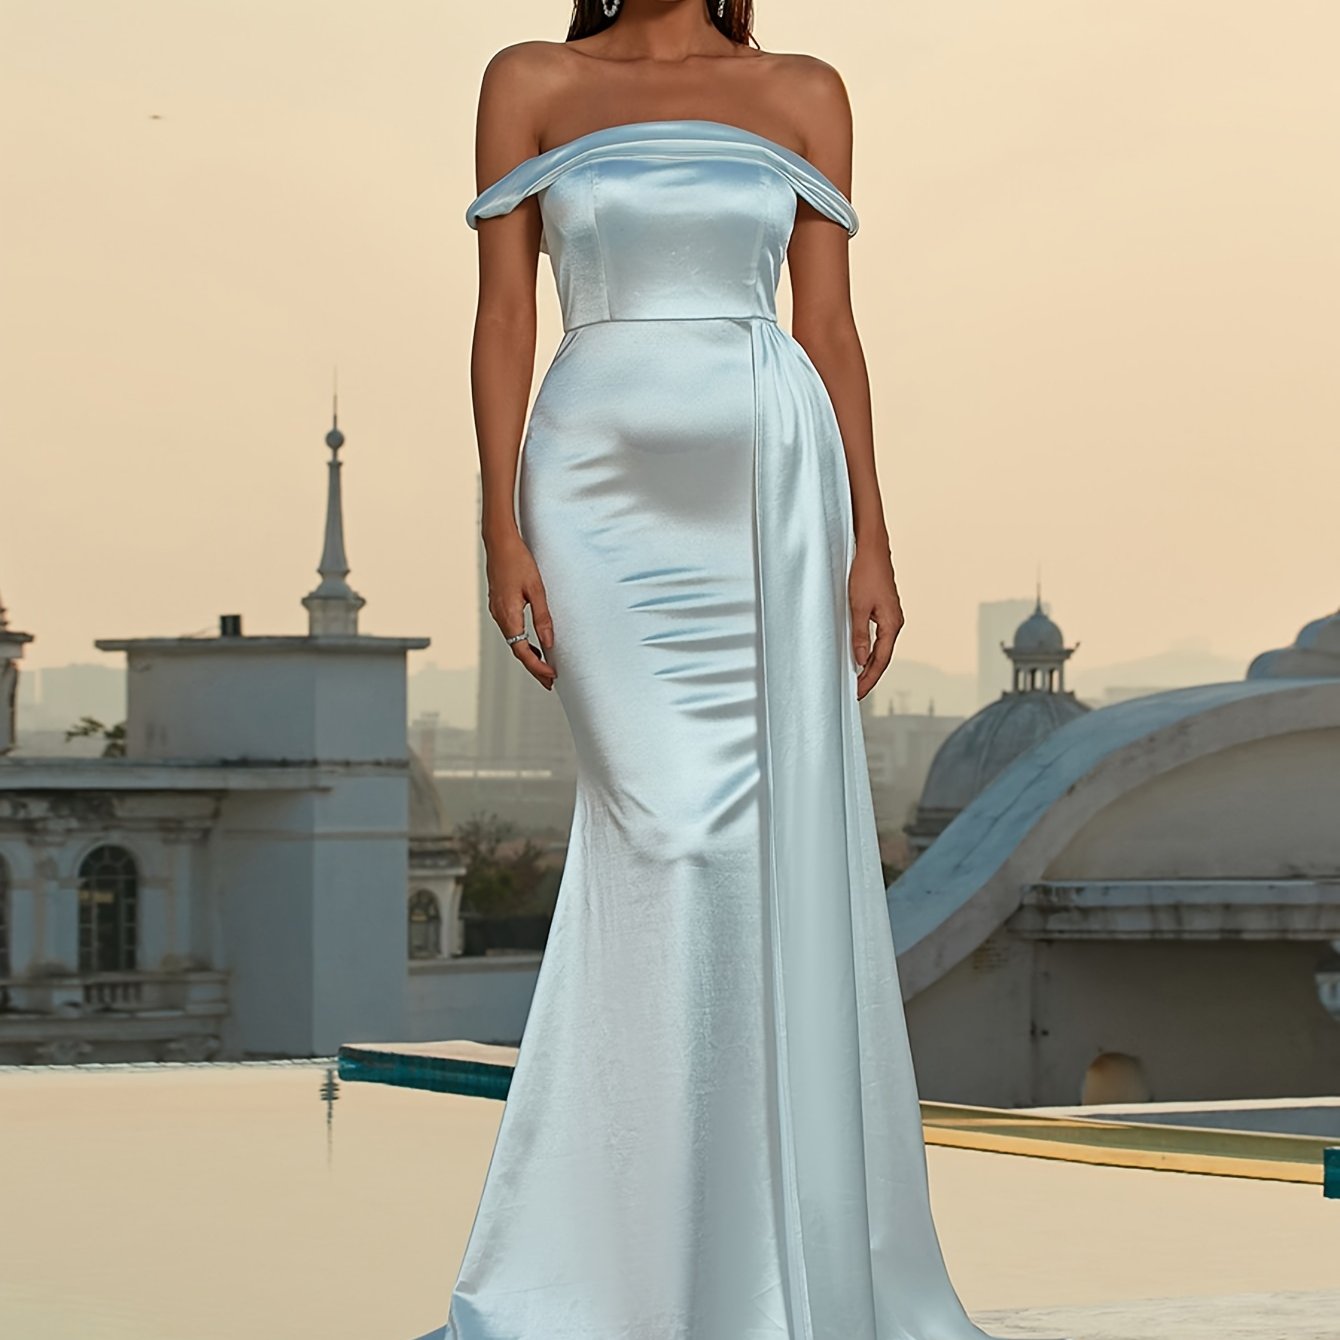 Solid-Colored Off Shoulder Dress - Exquisitely Elegant with Daring Backless Design, Beautifully Ruched Details, Flattering Slim-Fit Silhouette, and Flowing Floor-Length Hem - Perfect for Bridesmaids and Formal Occasions, Womens Formal Wear